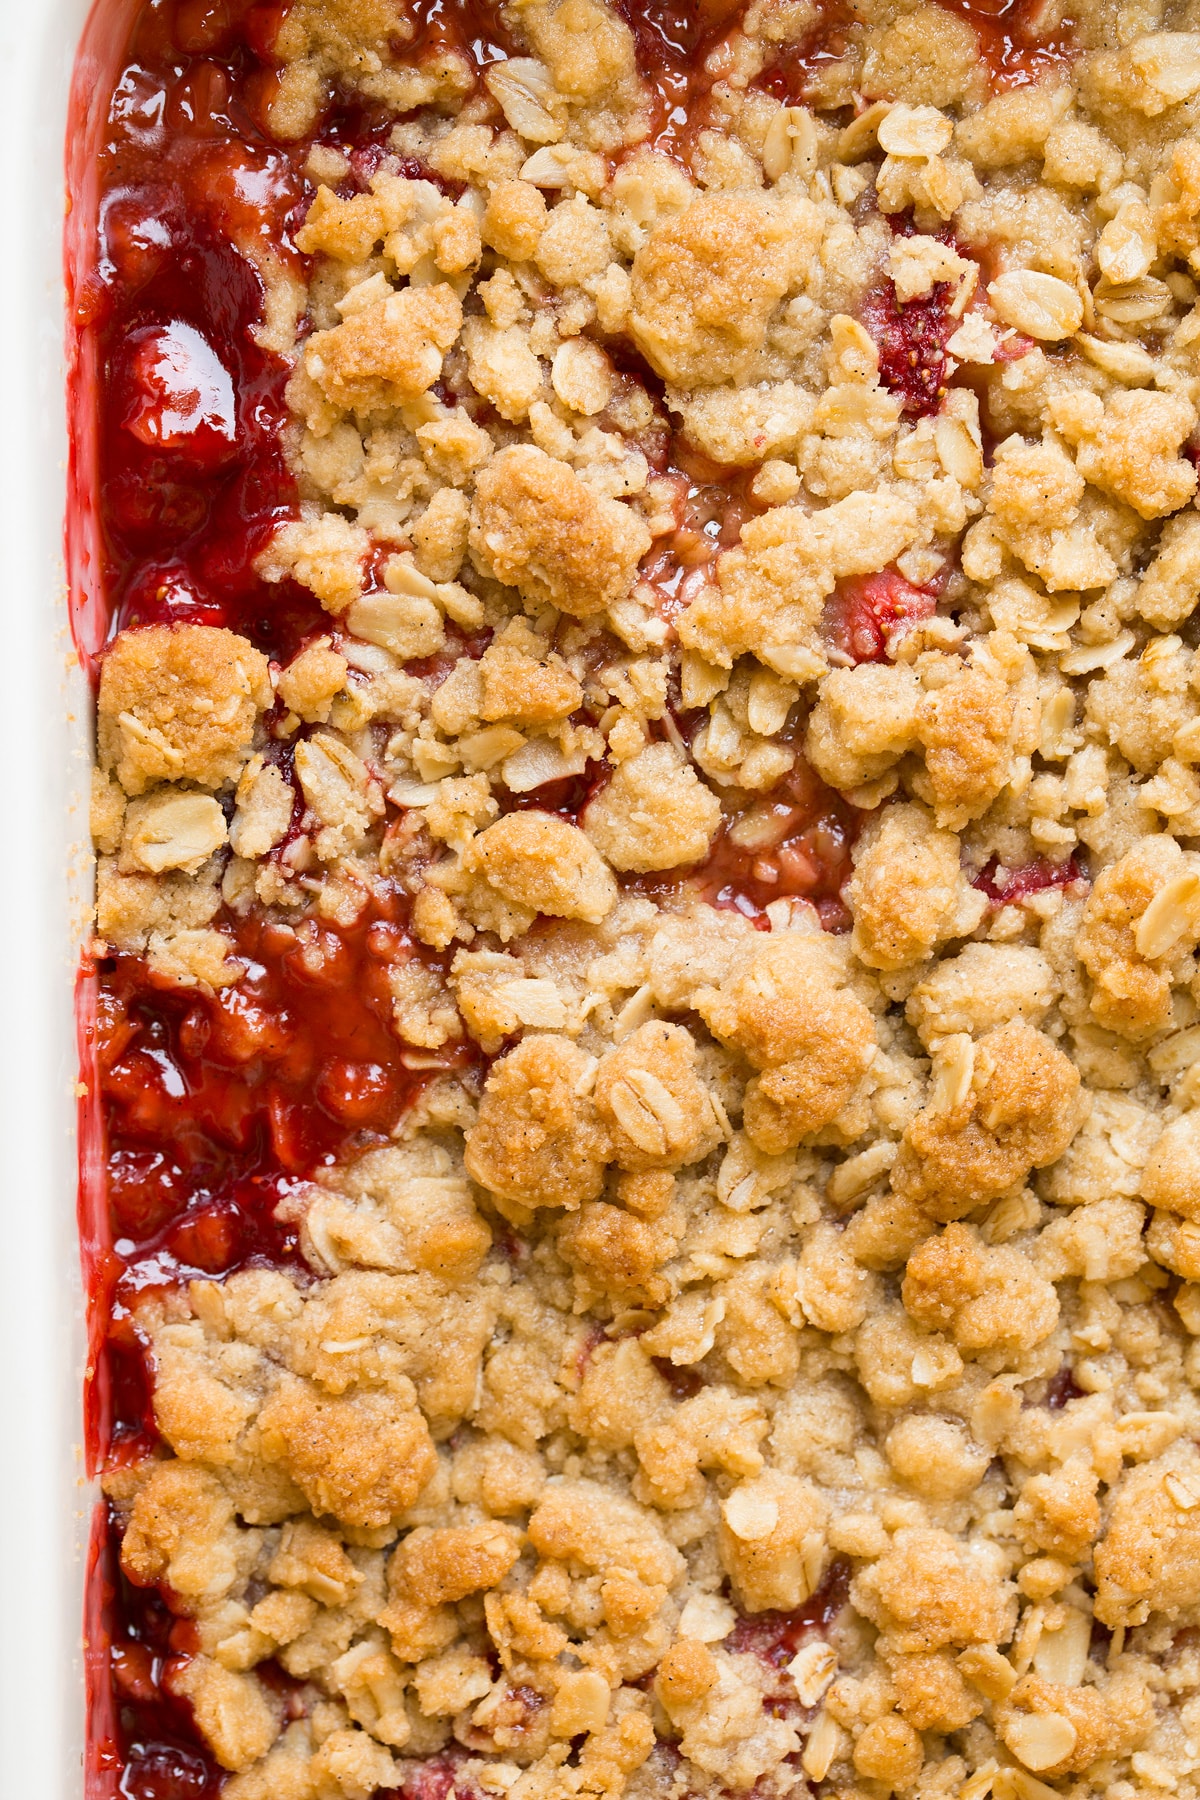 Close up image of baked strawberry rhubarb crisp in a white ceramic baking dish.